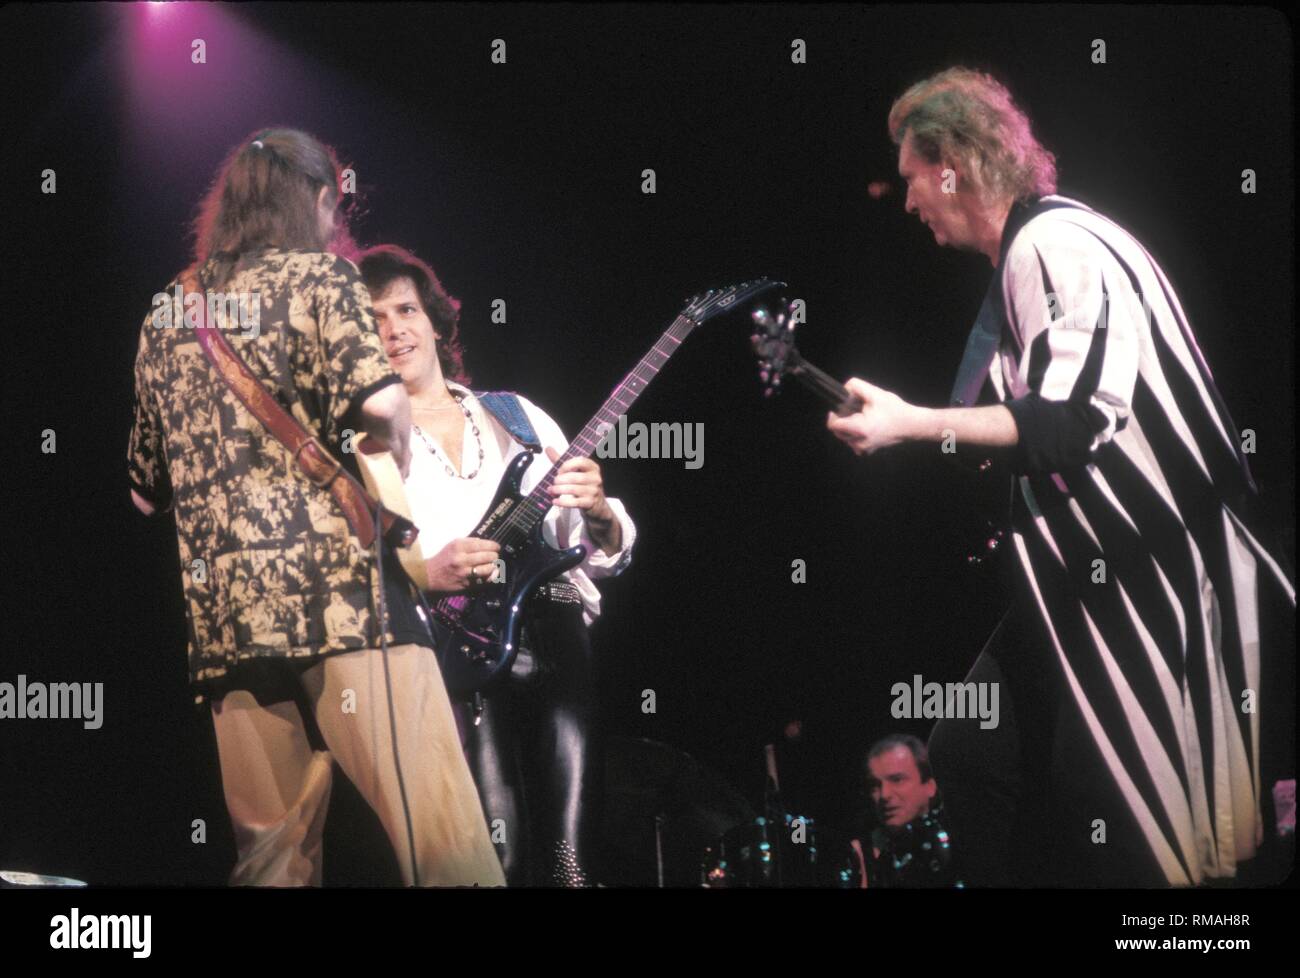 Musicians Steve Howe, Trevor Rabin and Chris Squire of the progressive rock band Yes are shown performing on stage during a 'live' concert appearance. Stock Photo